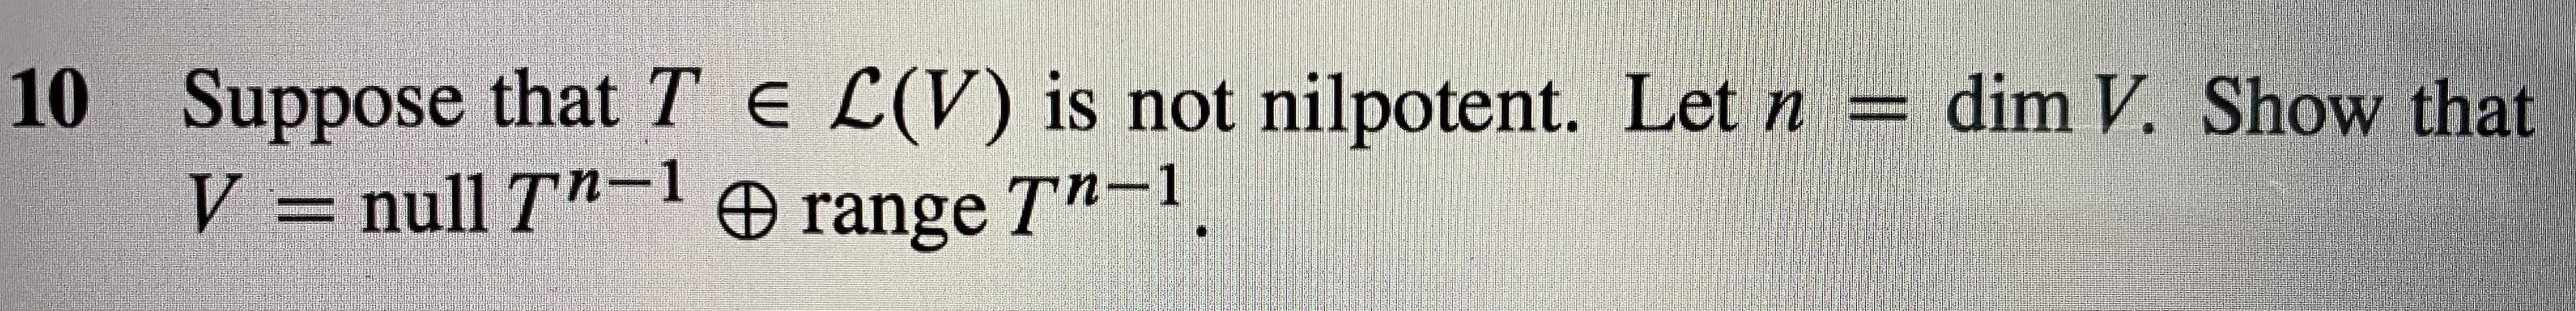 Suppose that TE L(V) is not nilpotent. Let n =
V – null T"-1
dim V. Show that
O range T"-1.
